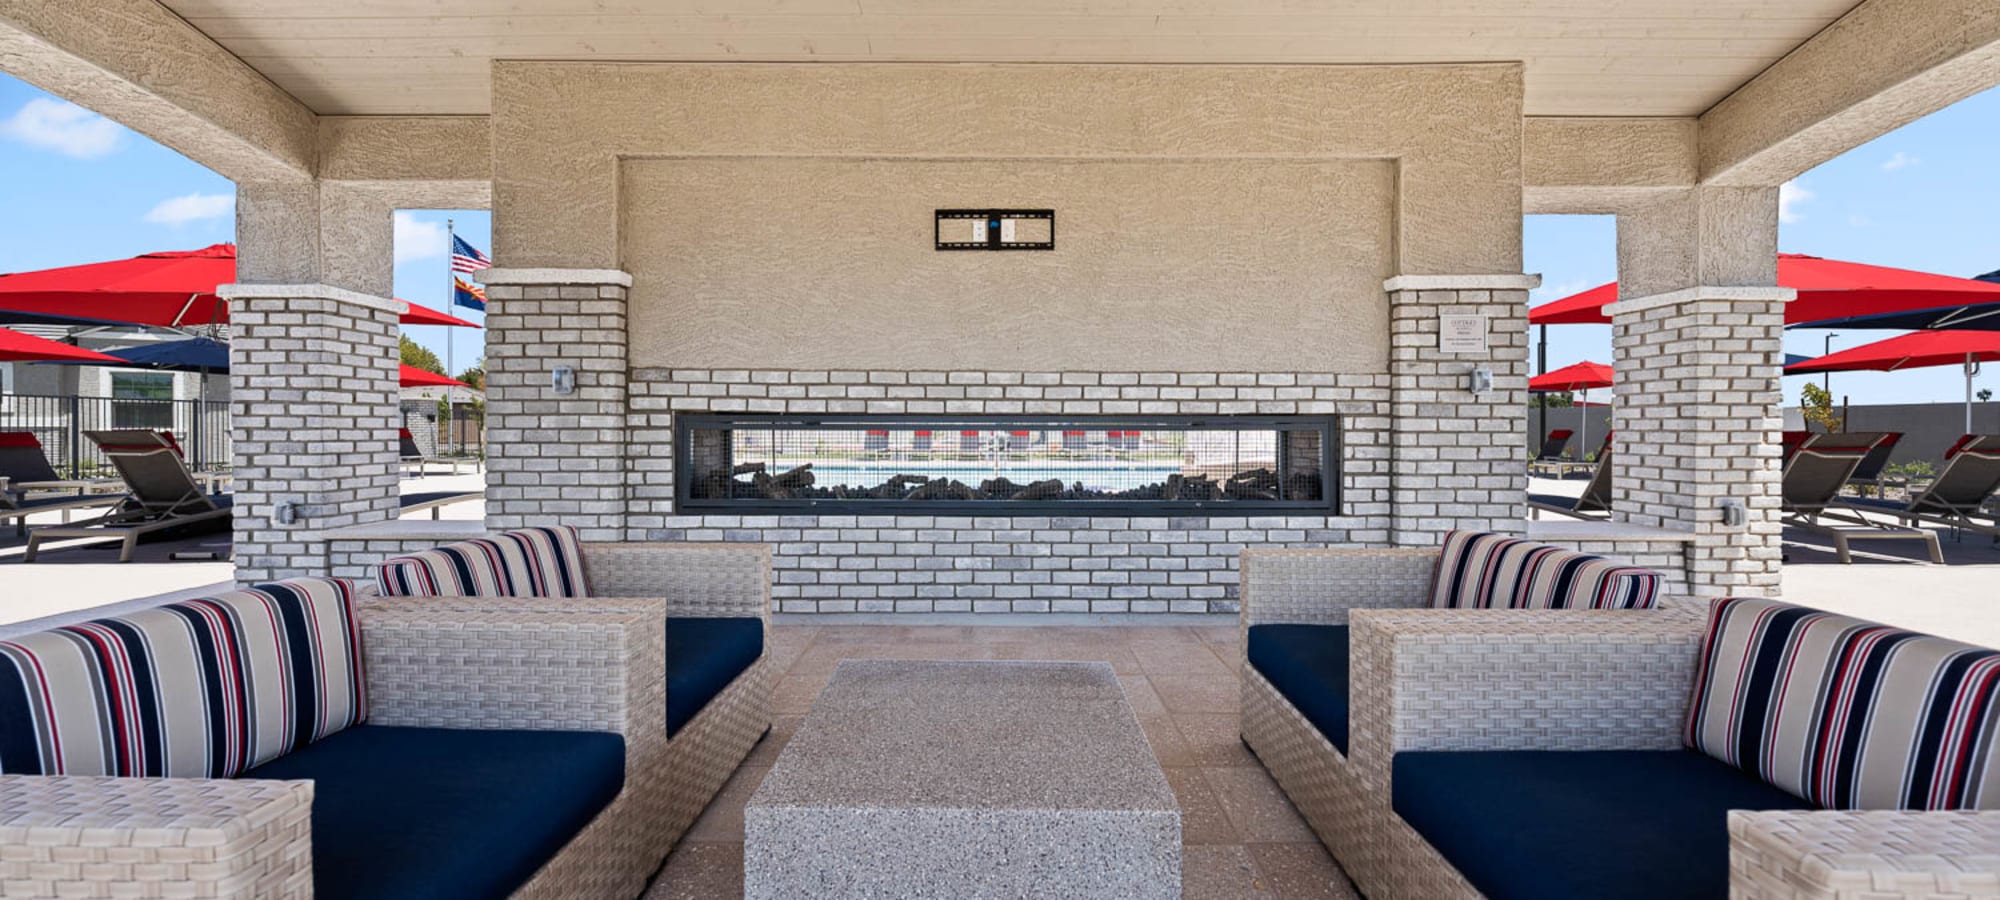 Outdoor seating area with fireplace at Cottages at McDowell in Avondale, Arizona